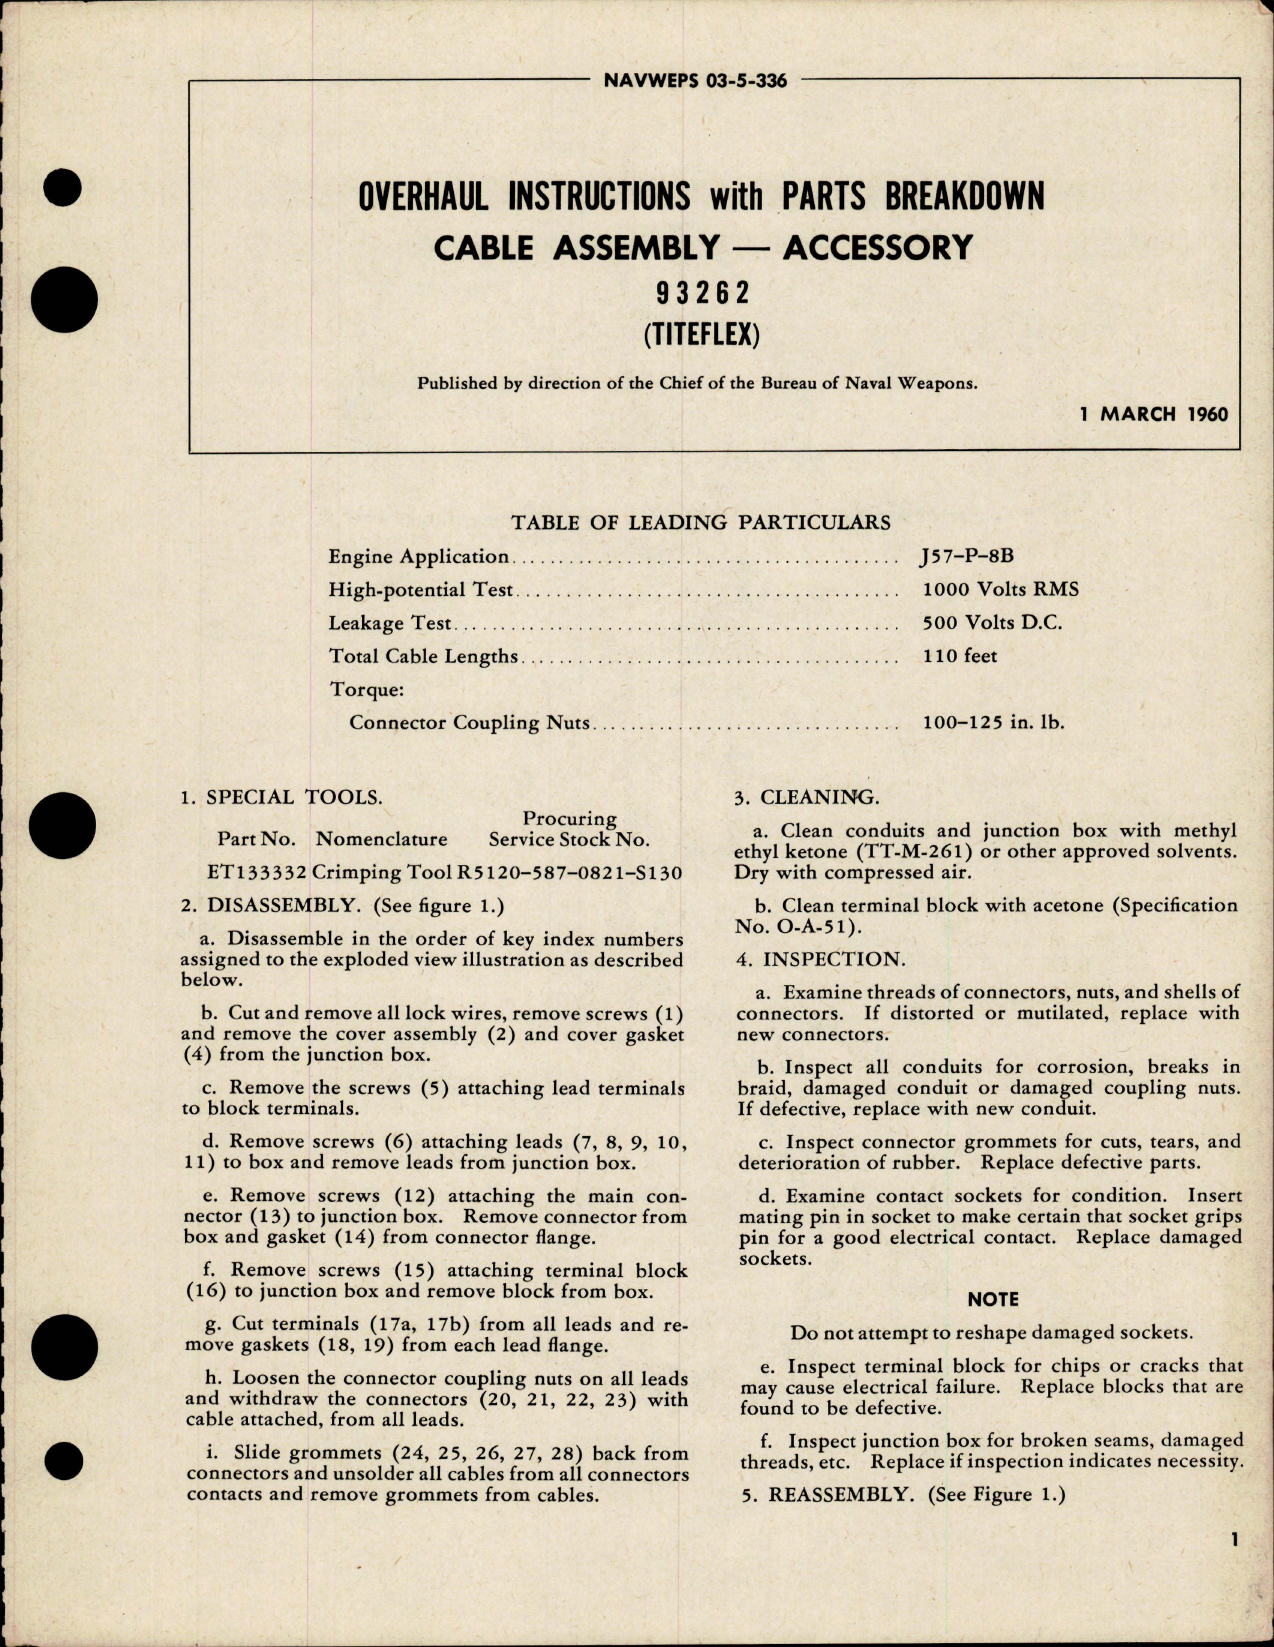 Sample page 1 from AirCorps Library document: Overhaul Instructions with Parts Breakdown for Cable Assembly - Accessory - 93262 